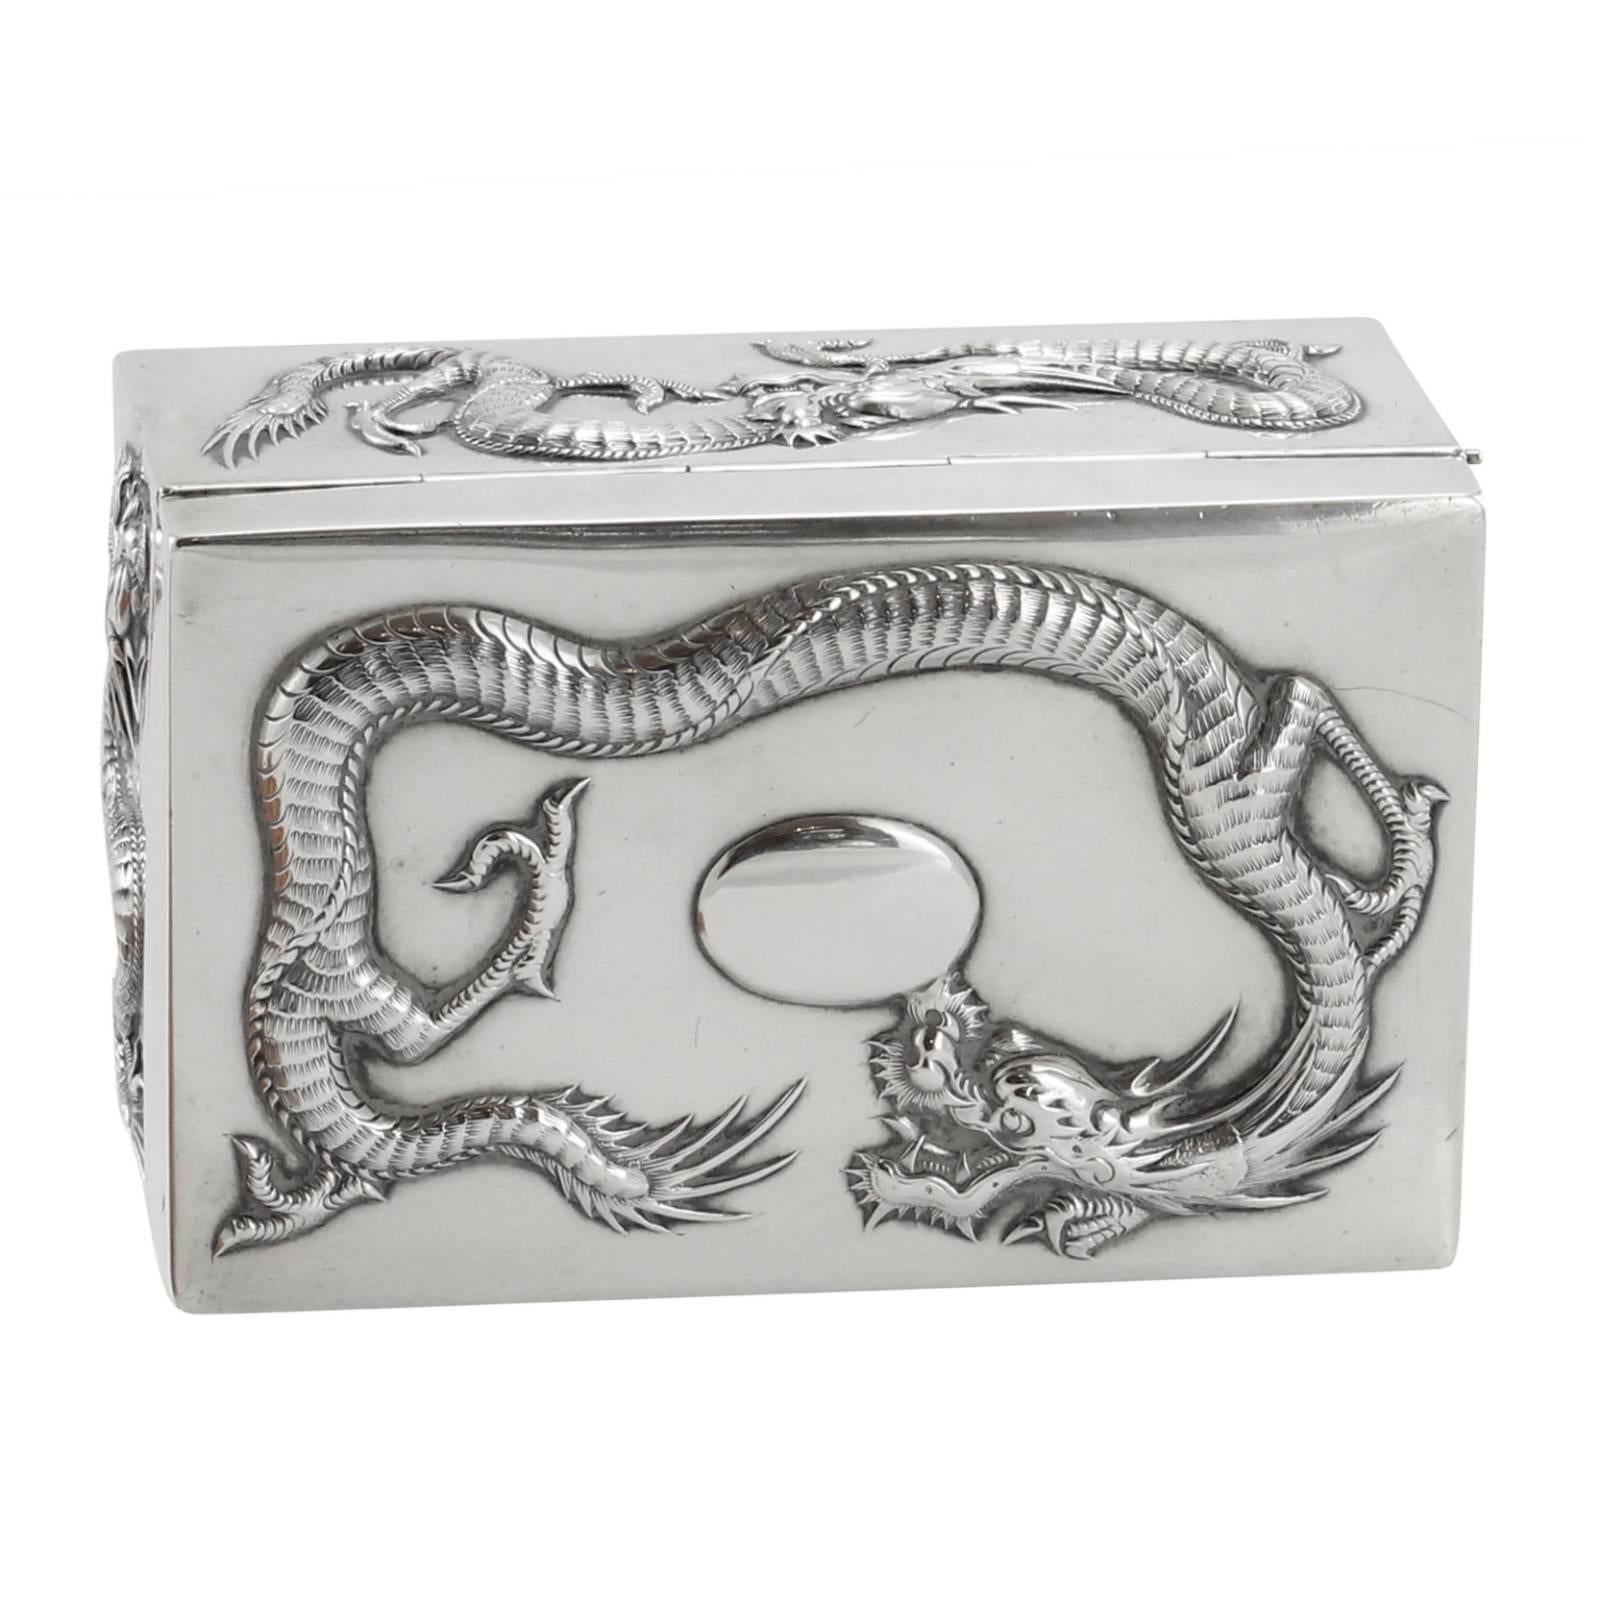 A late 19th century Chinese Qing dynasty silver box, with the silver mark for Cumshing of Canton. The top, front, back and each side decorated with a three clawed dragon. Cumshing is often recognized as one of the longest operating retail